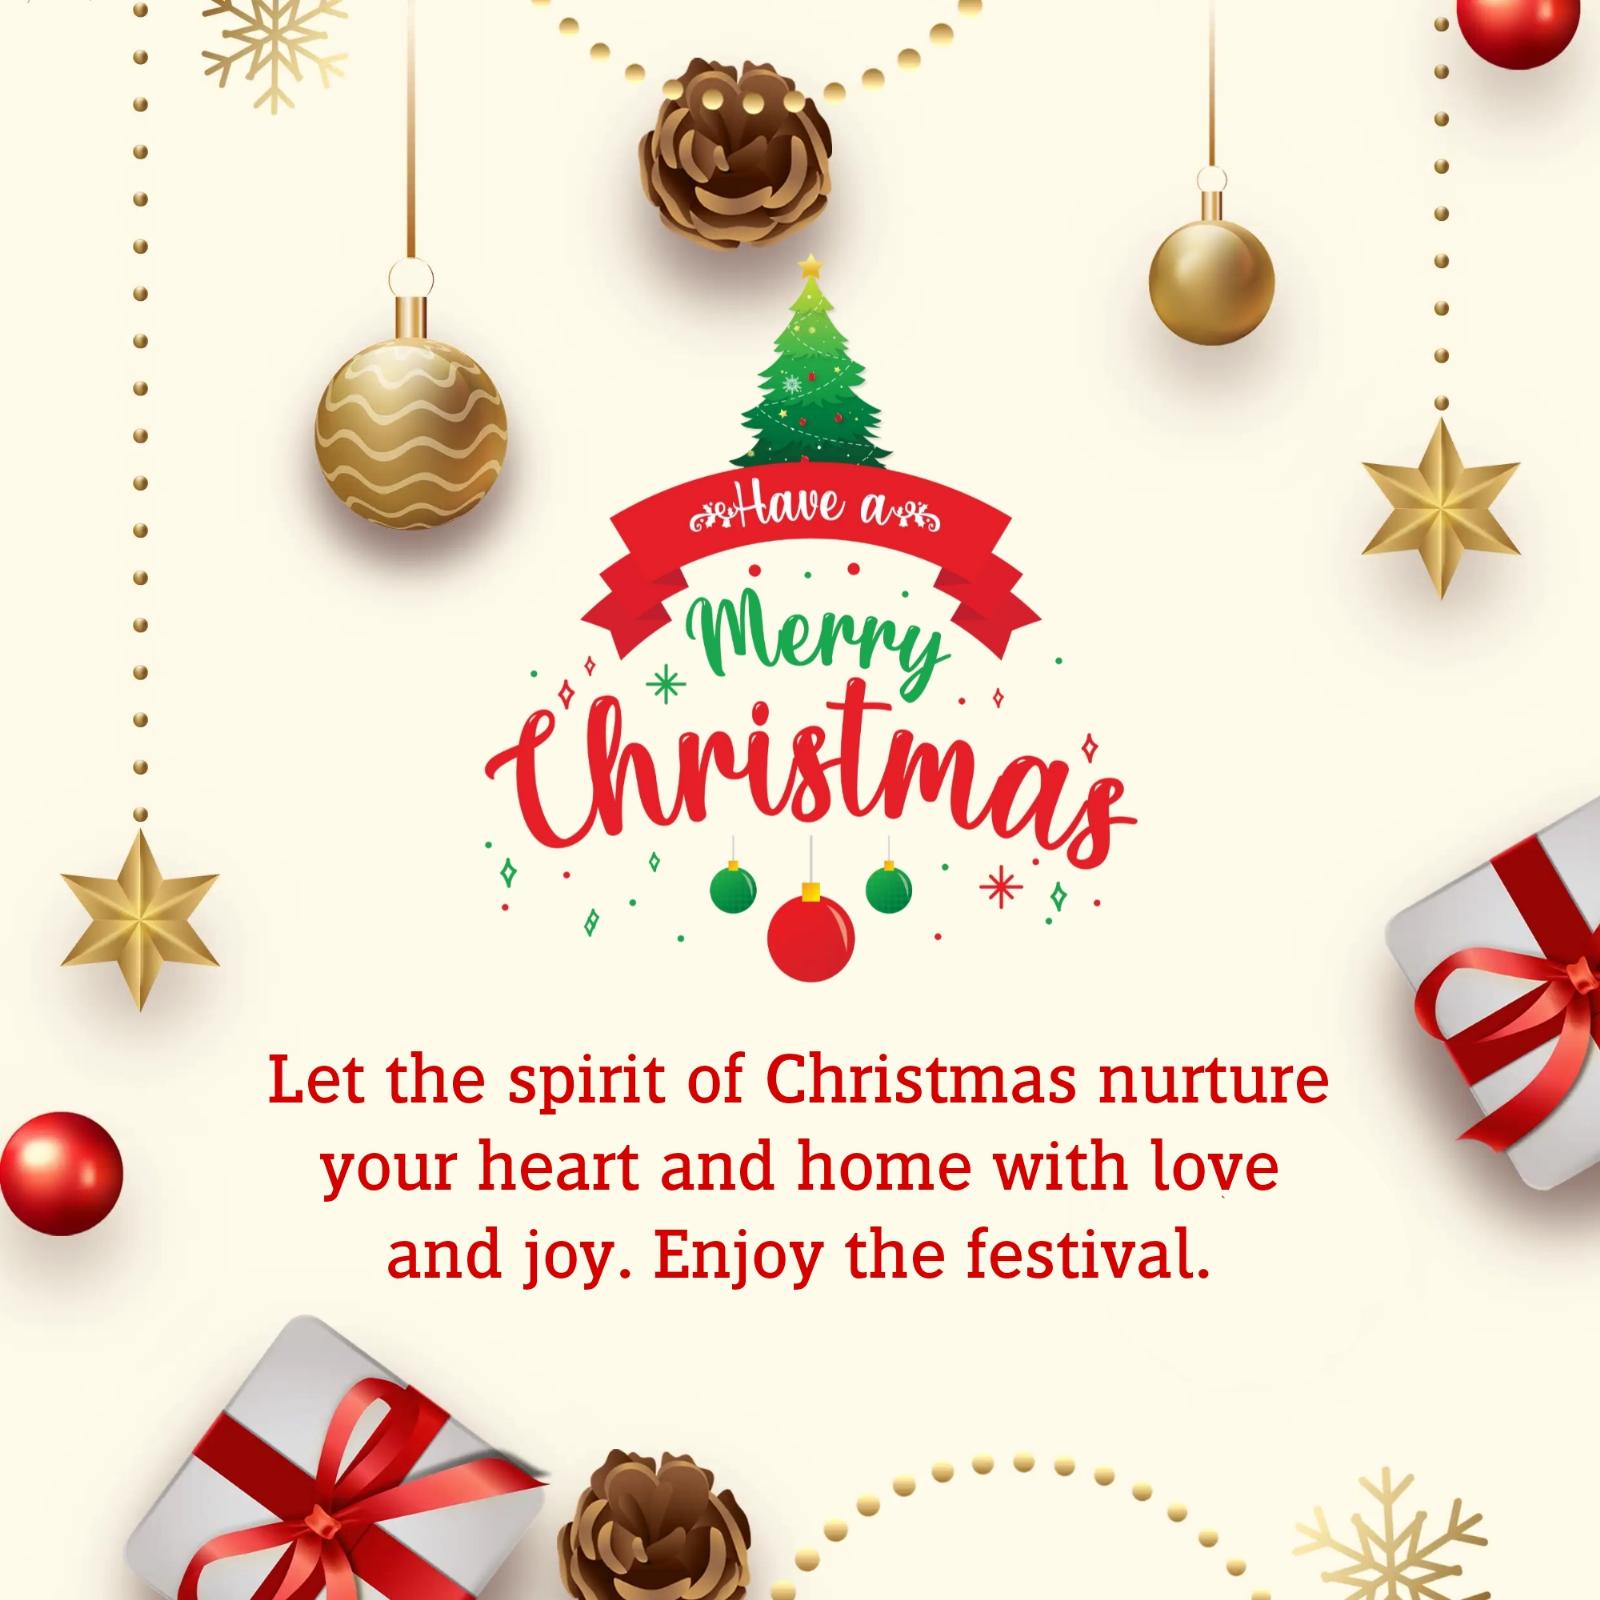 Let the spirit of Christmas nurture your heart and home with love